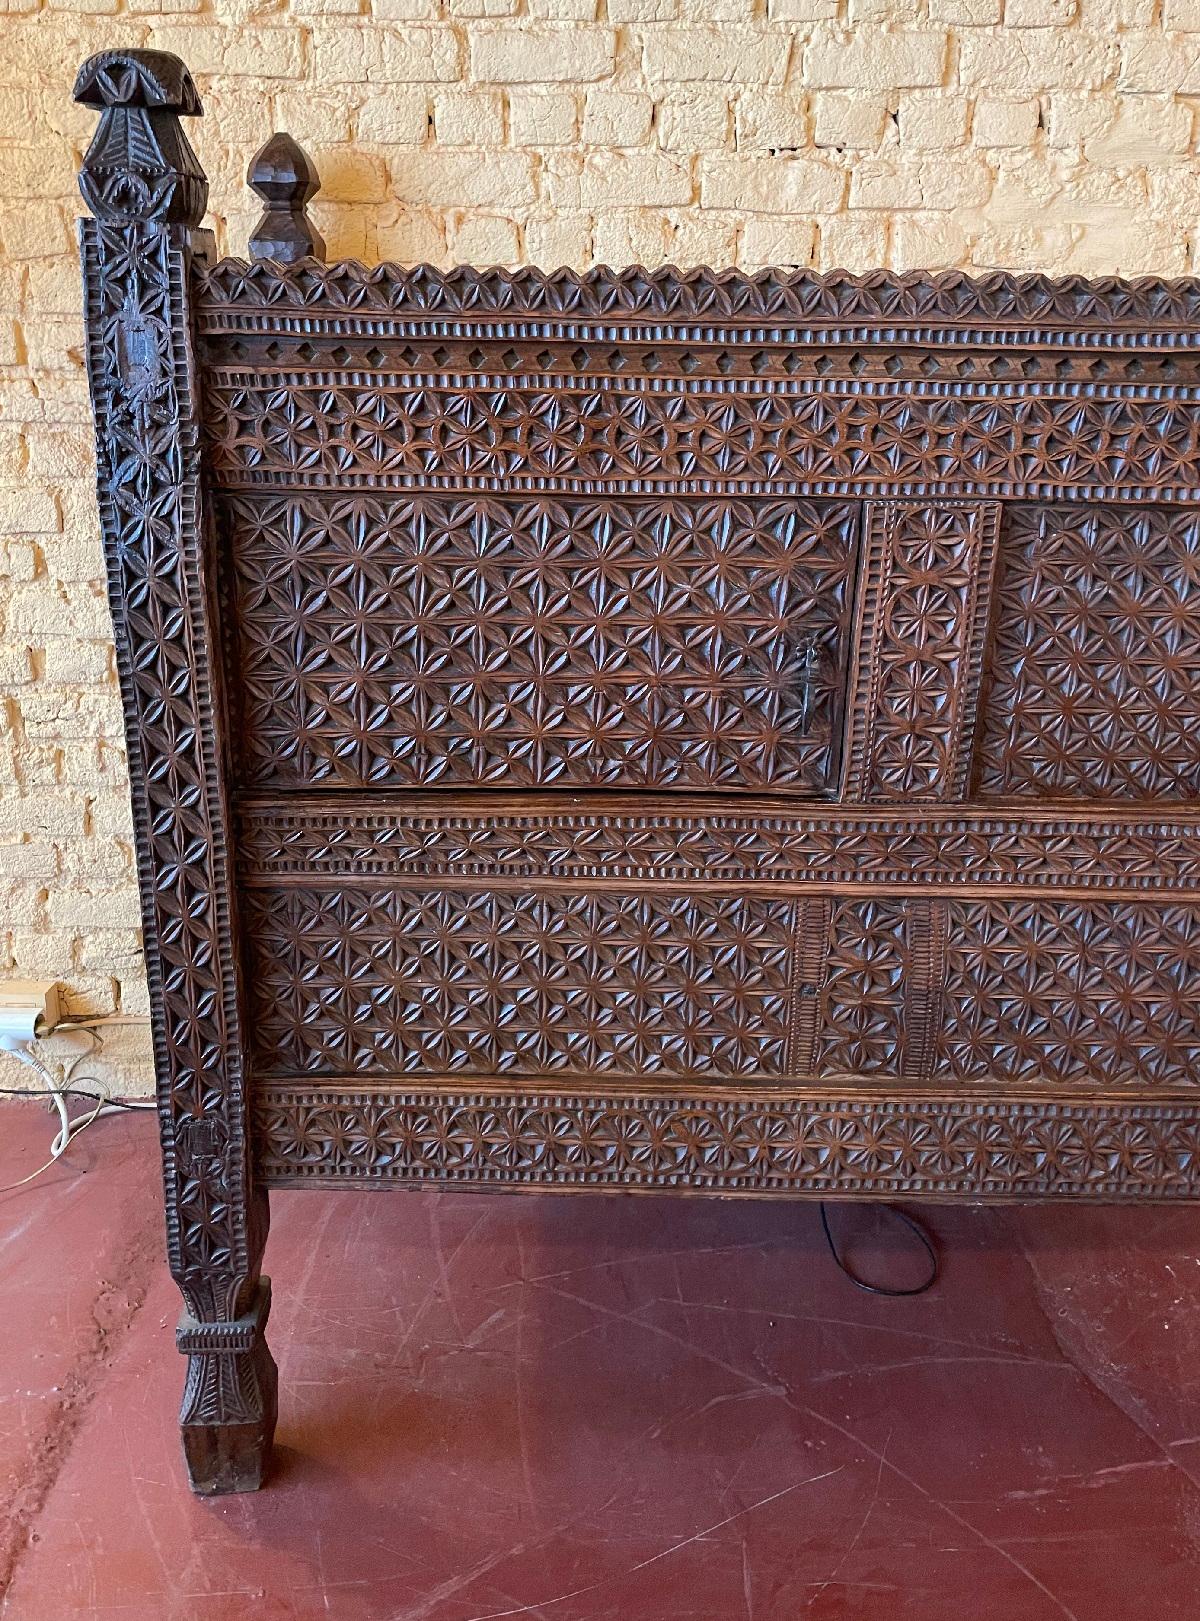 Superb Afghan wedding chest or buffet from Nuristan from the 18th century
Very elegant tribal chest richly carved with flowers and very decorative foliage composed of two doors on its carved face
Superb patina and in very good condition
Length